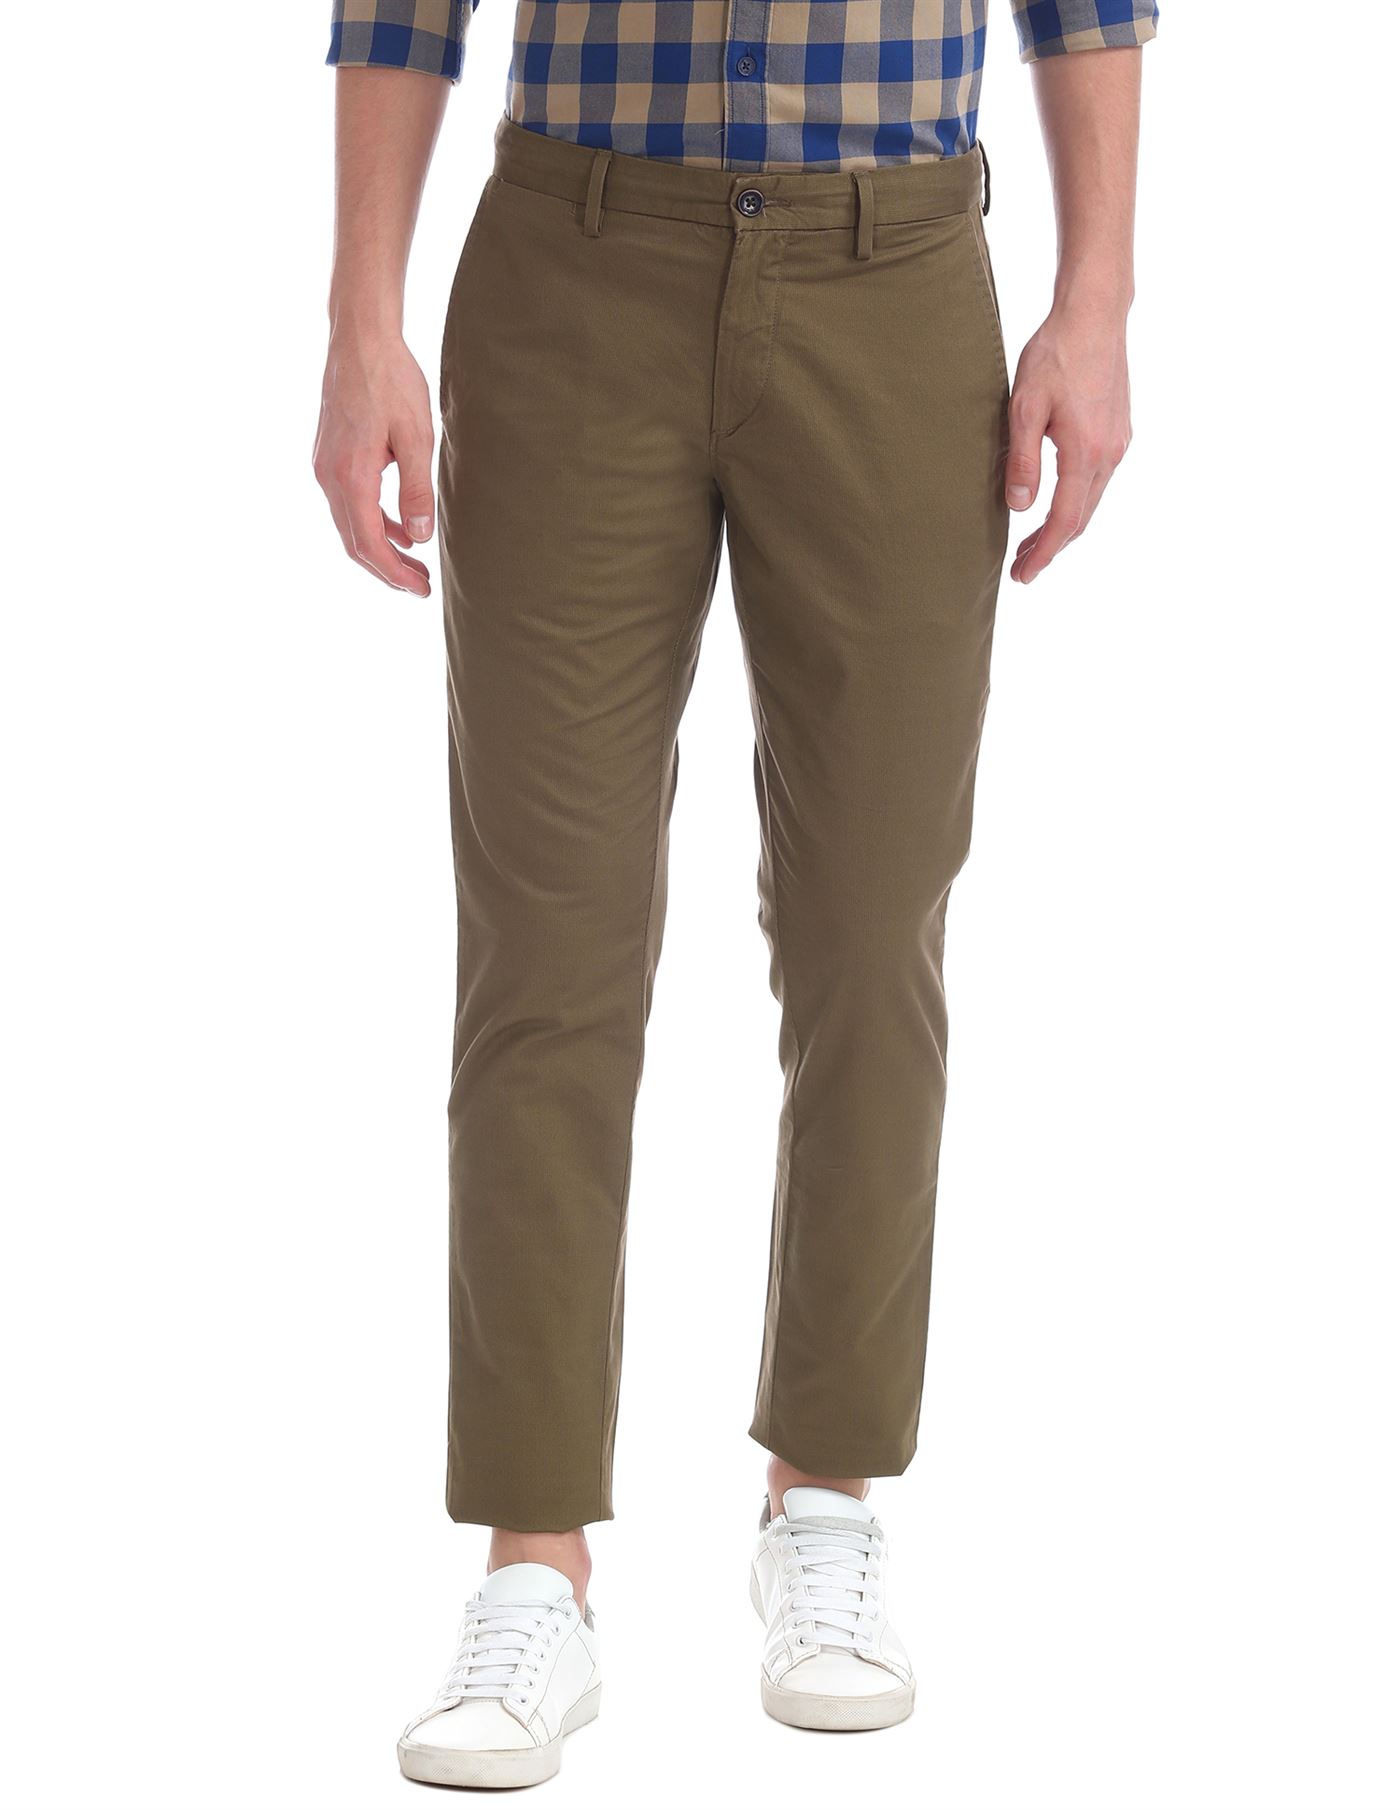 Buy Olive Green Trousers  Pants for Boys by US Polo Assn Online   Ajiocom